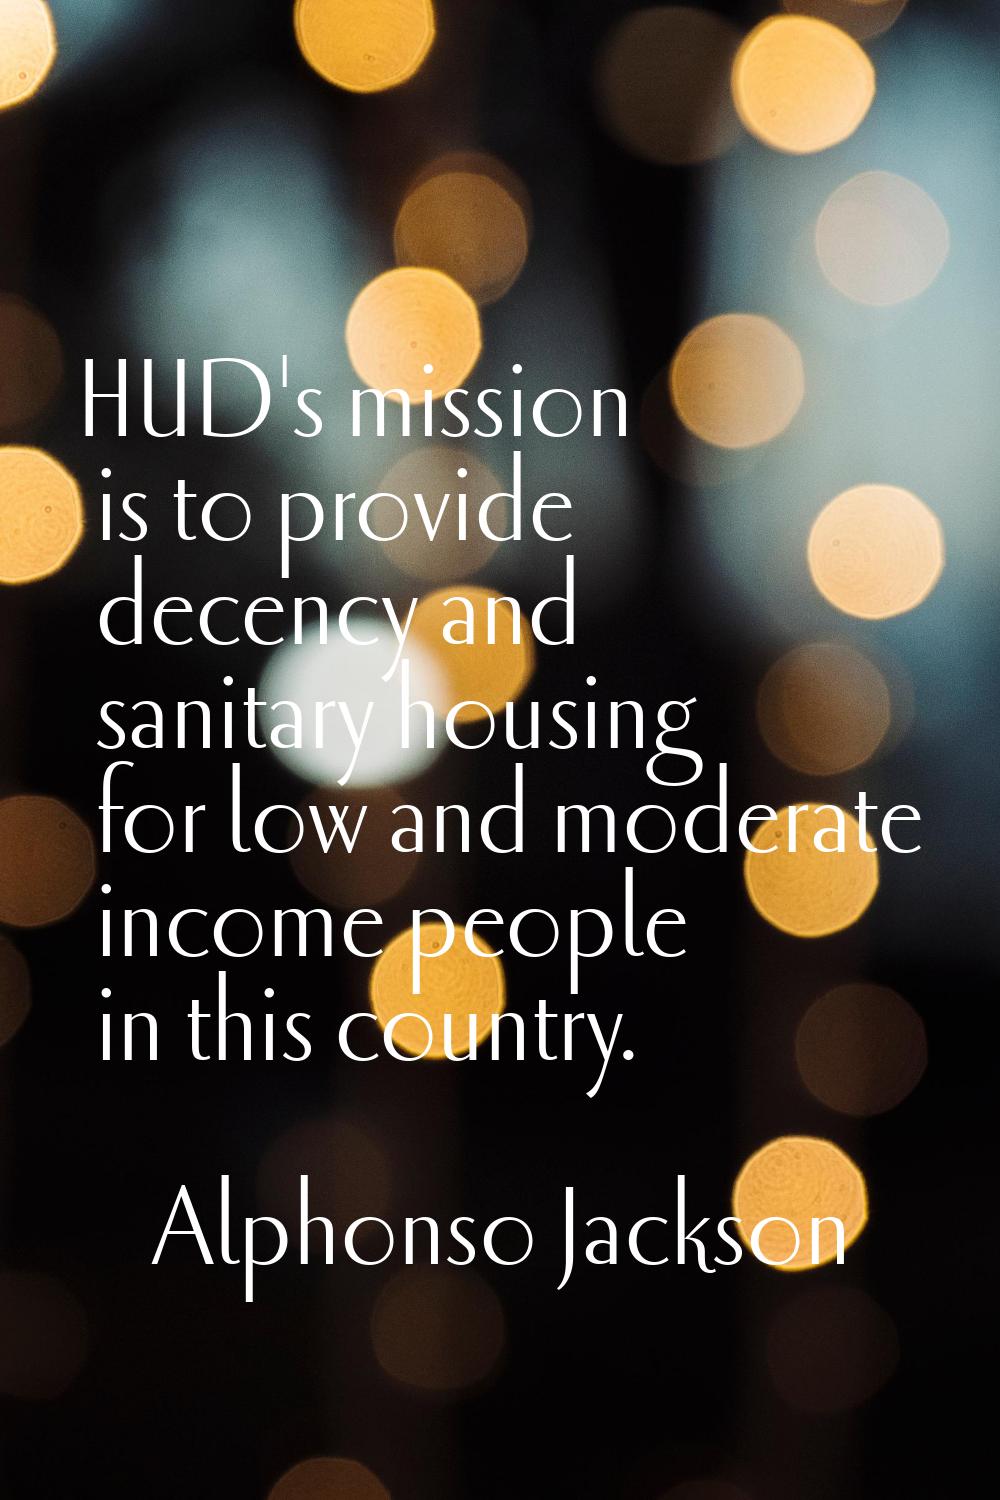 HUD's mission is to provide decency and sanitary housing for low and moderate income people in this